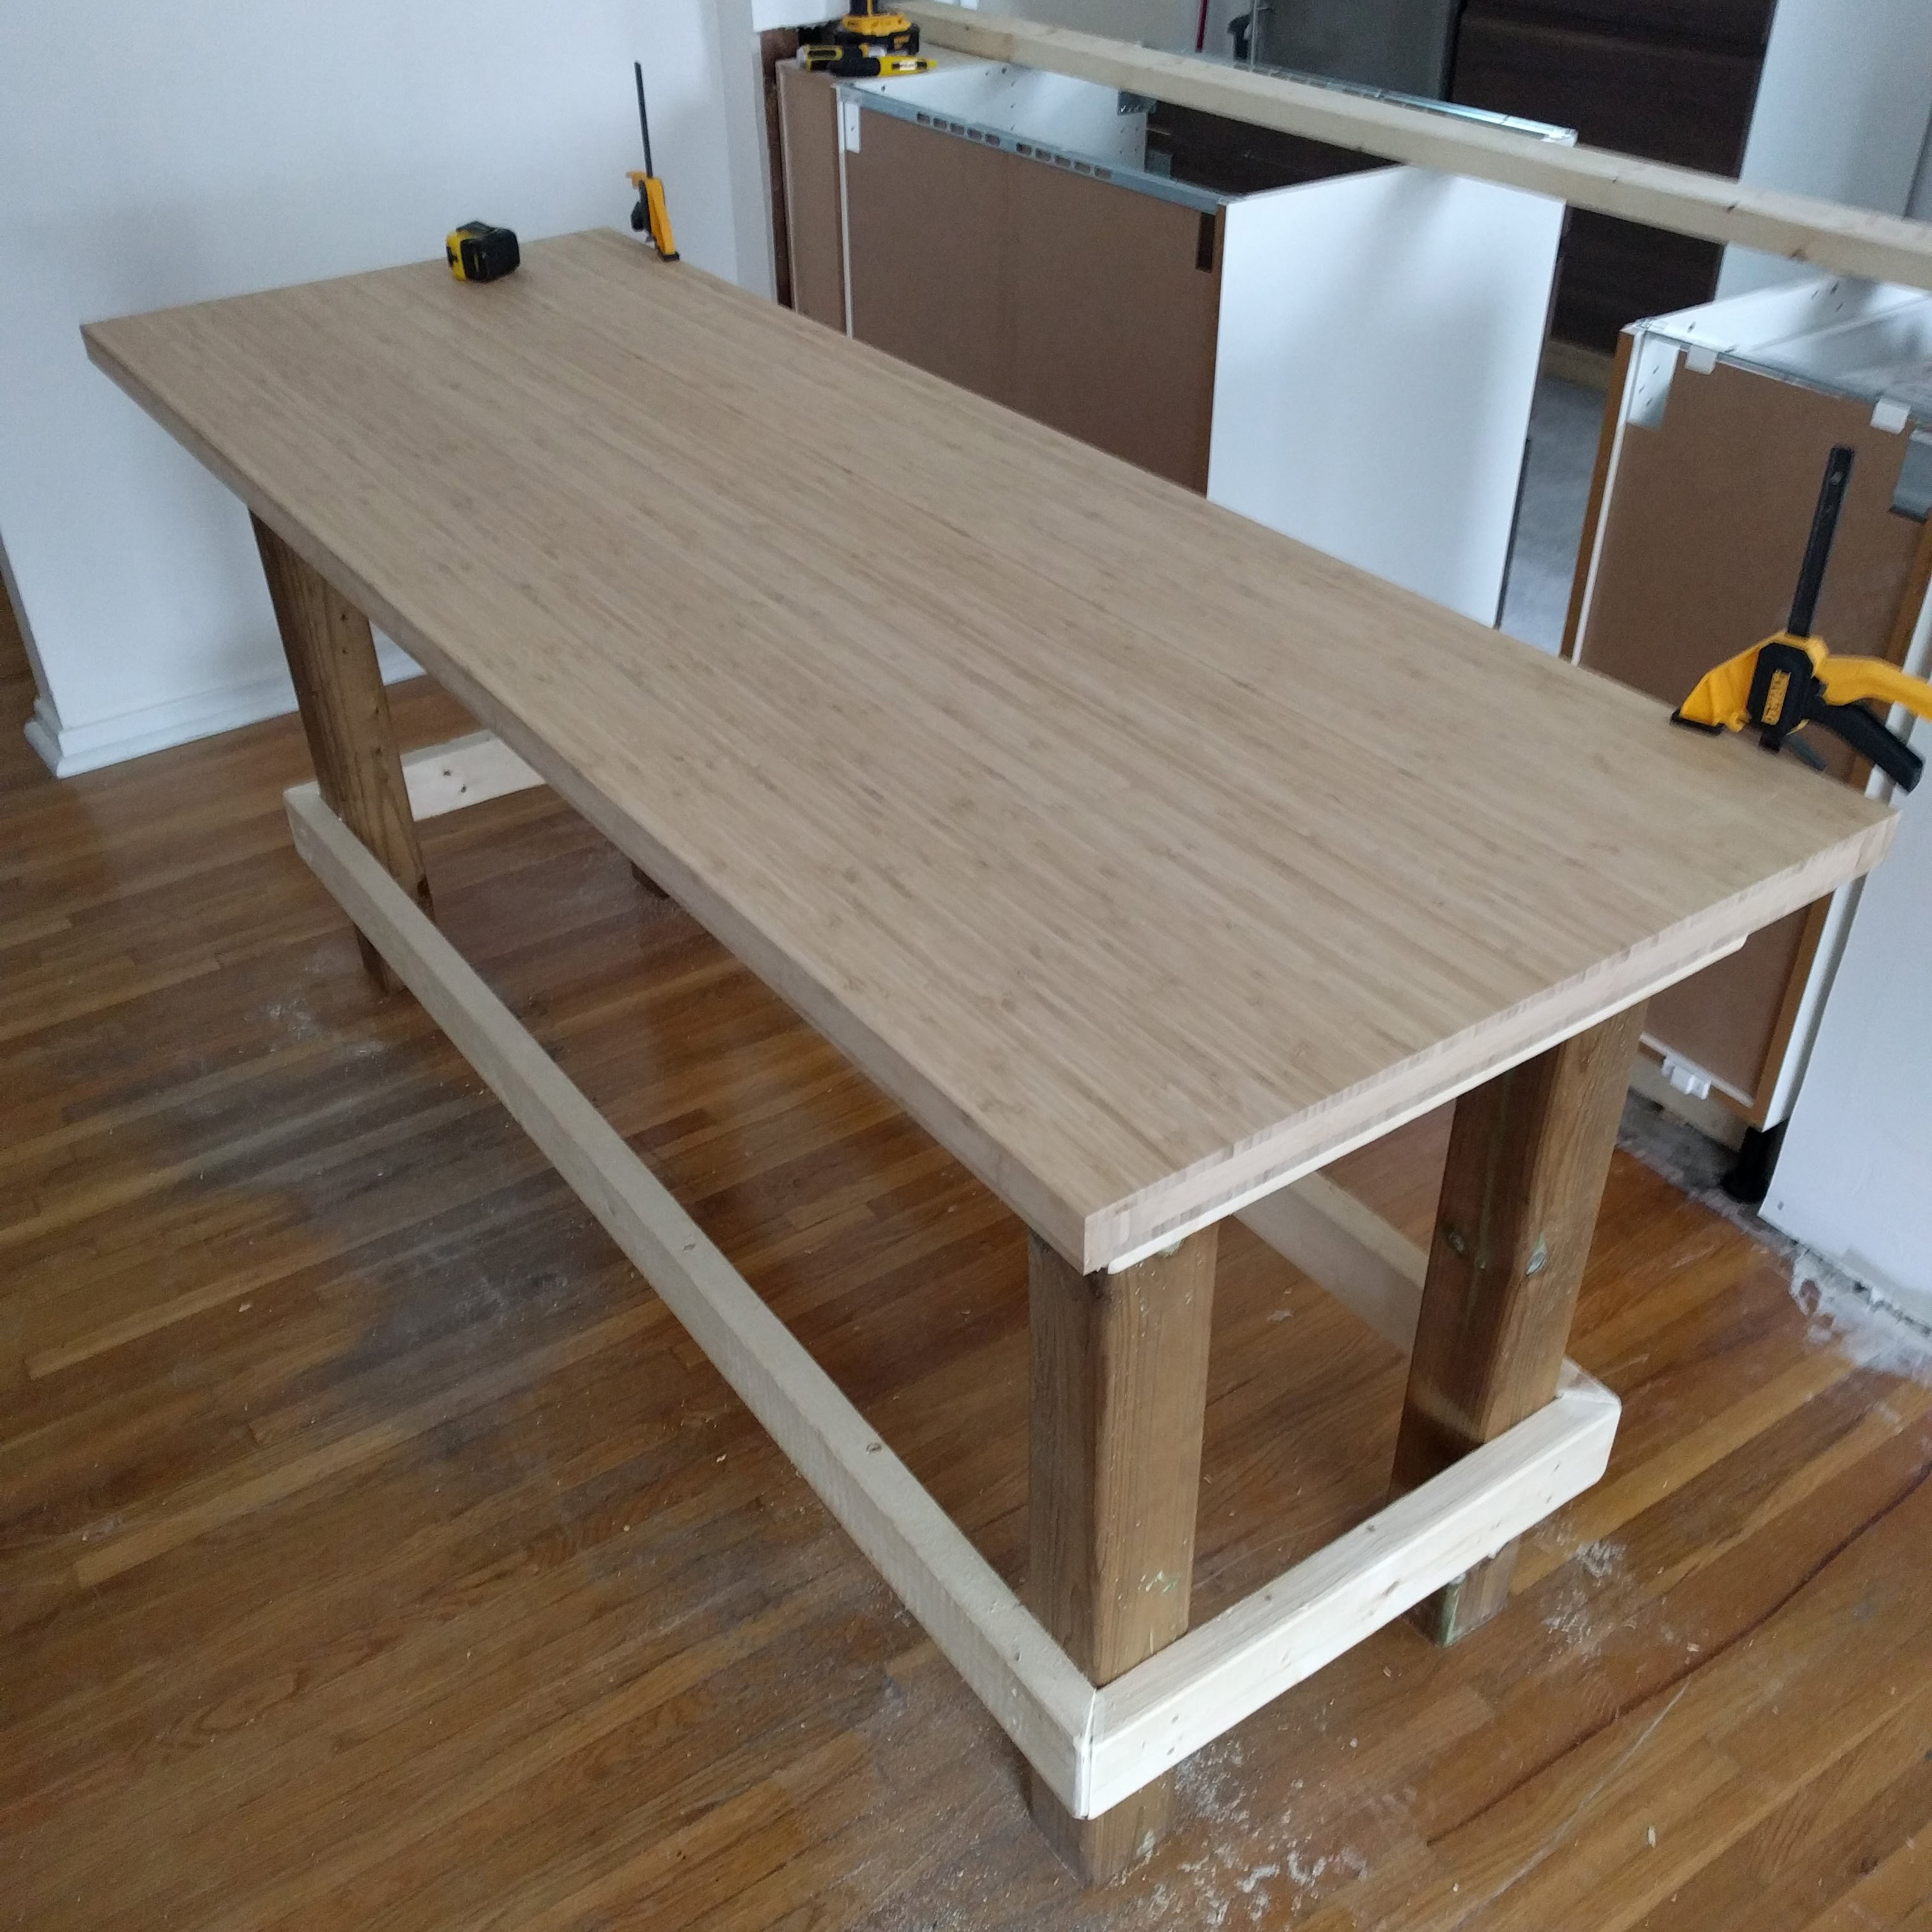 My workbench, One of the first times I decided to build my own rather than buying.